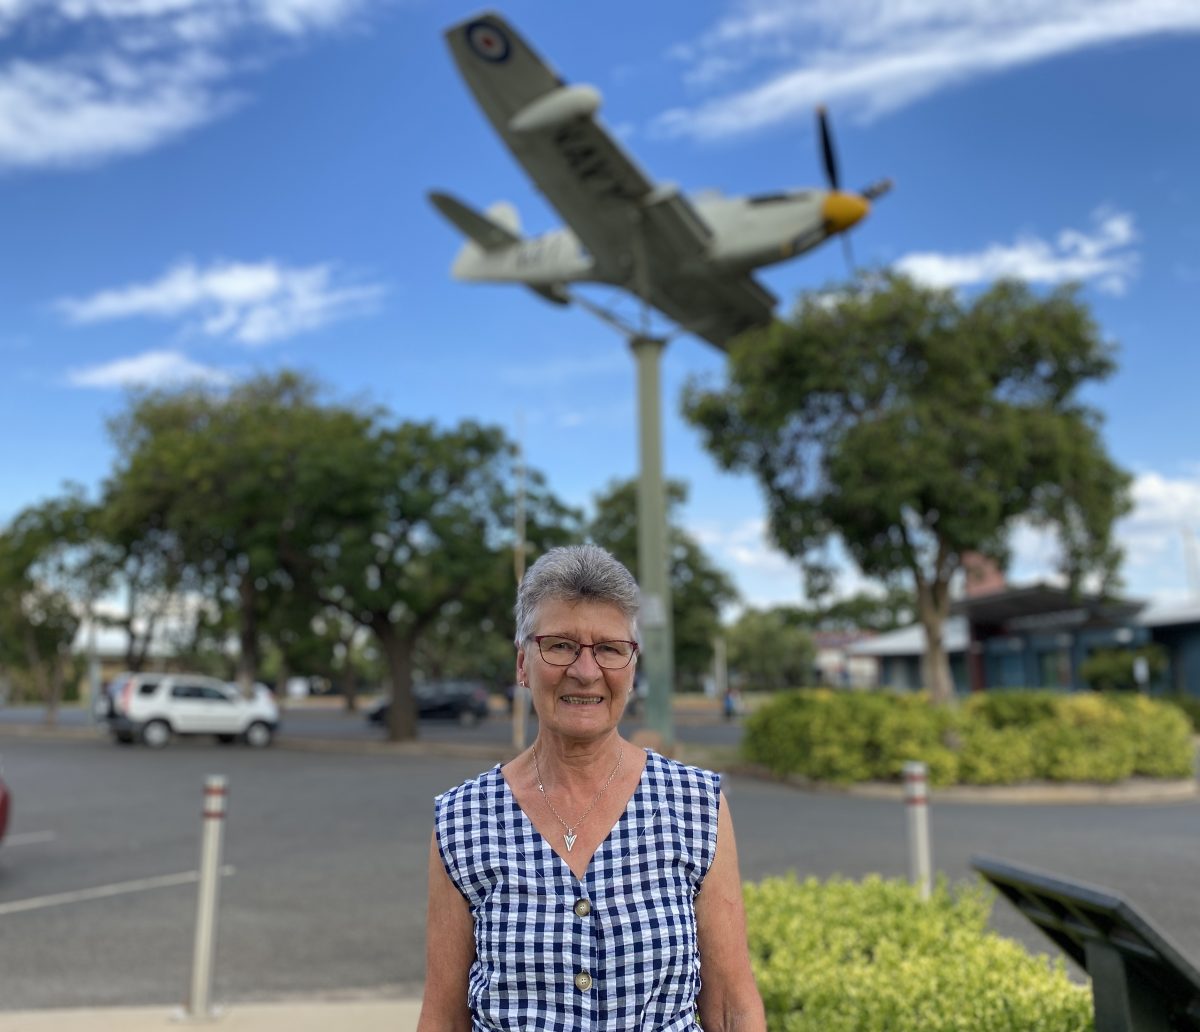 Sue Wade in front of airplane